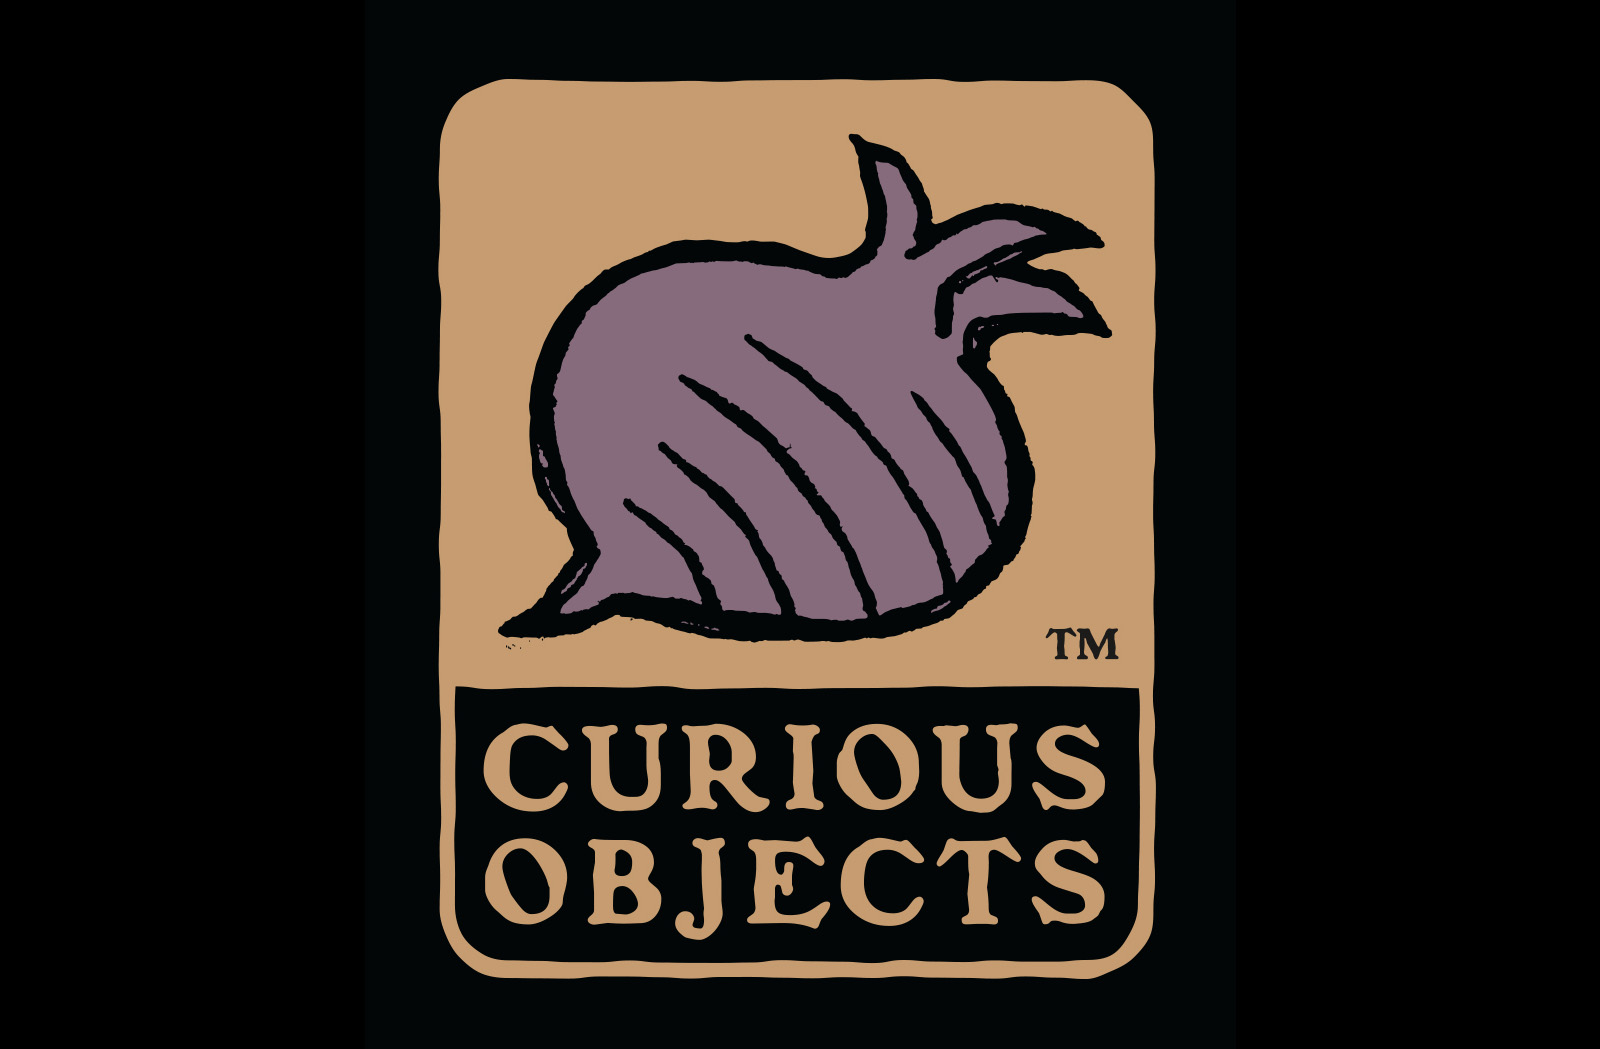 Dark Horse sheds new light on Mike Mignola's new shared universe 'Curious Objects'